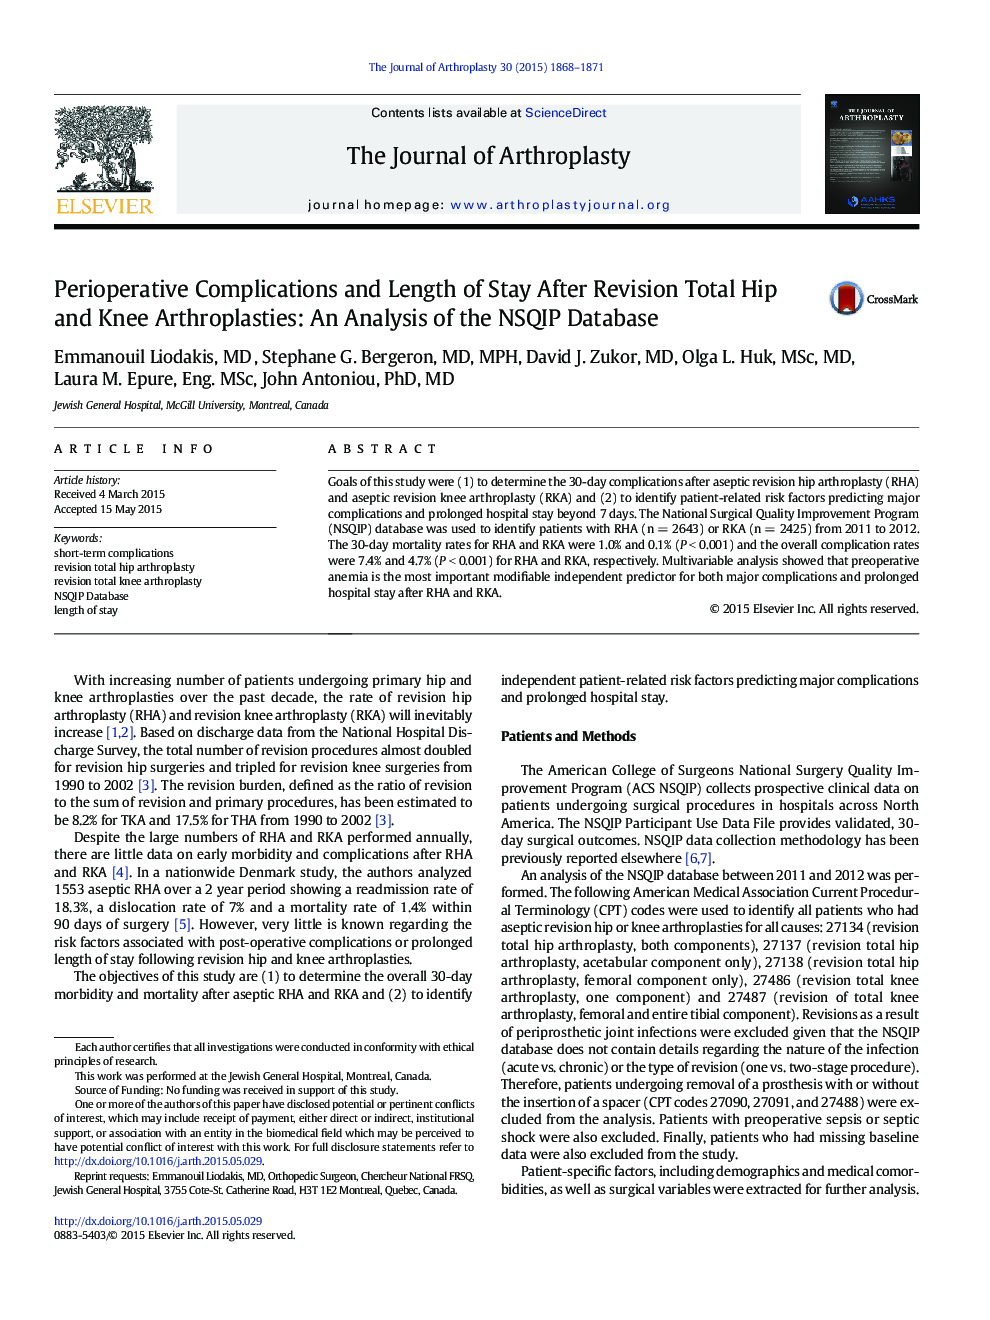 Perioperative Complications and Length of Stay After Revision Total Hip and Knee Arthroplasties: An Analysis of the NSQIP Database 